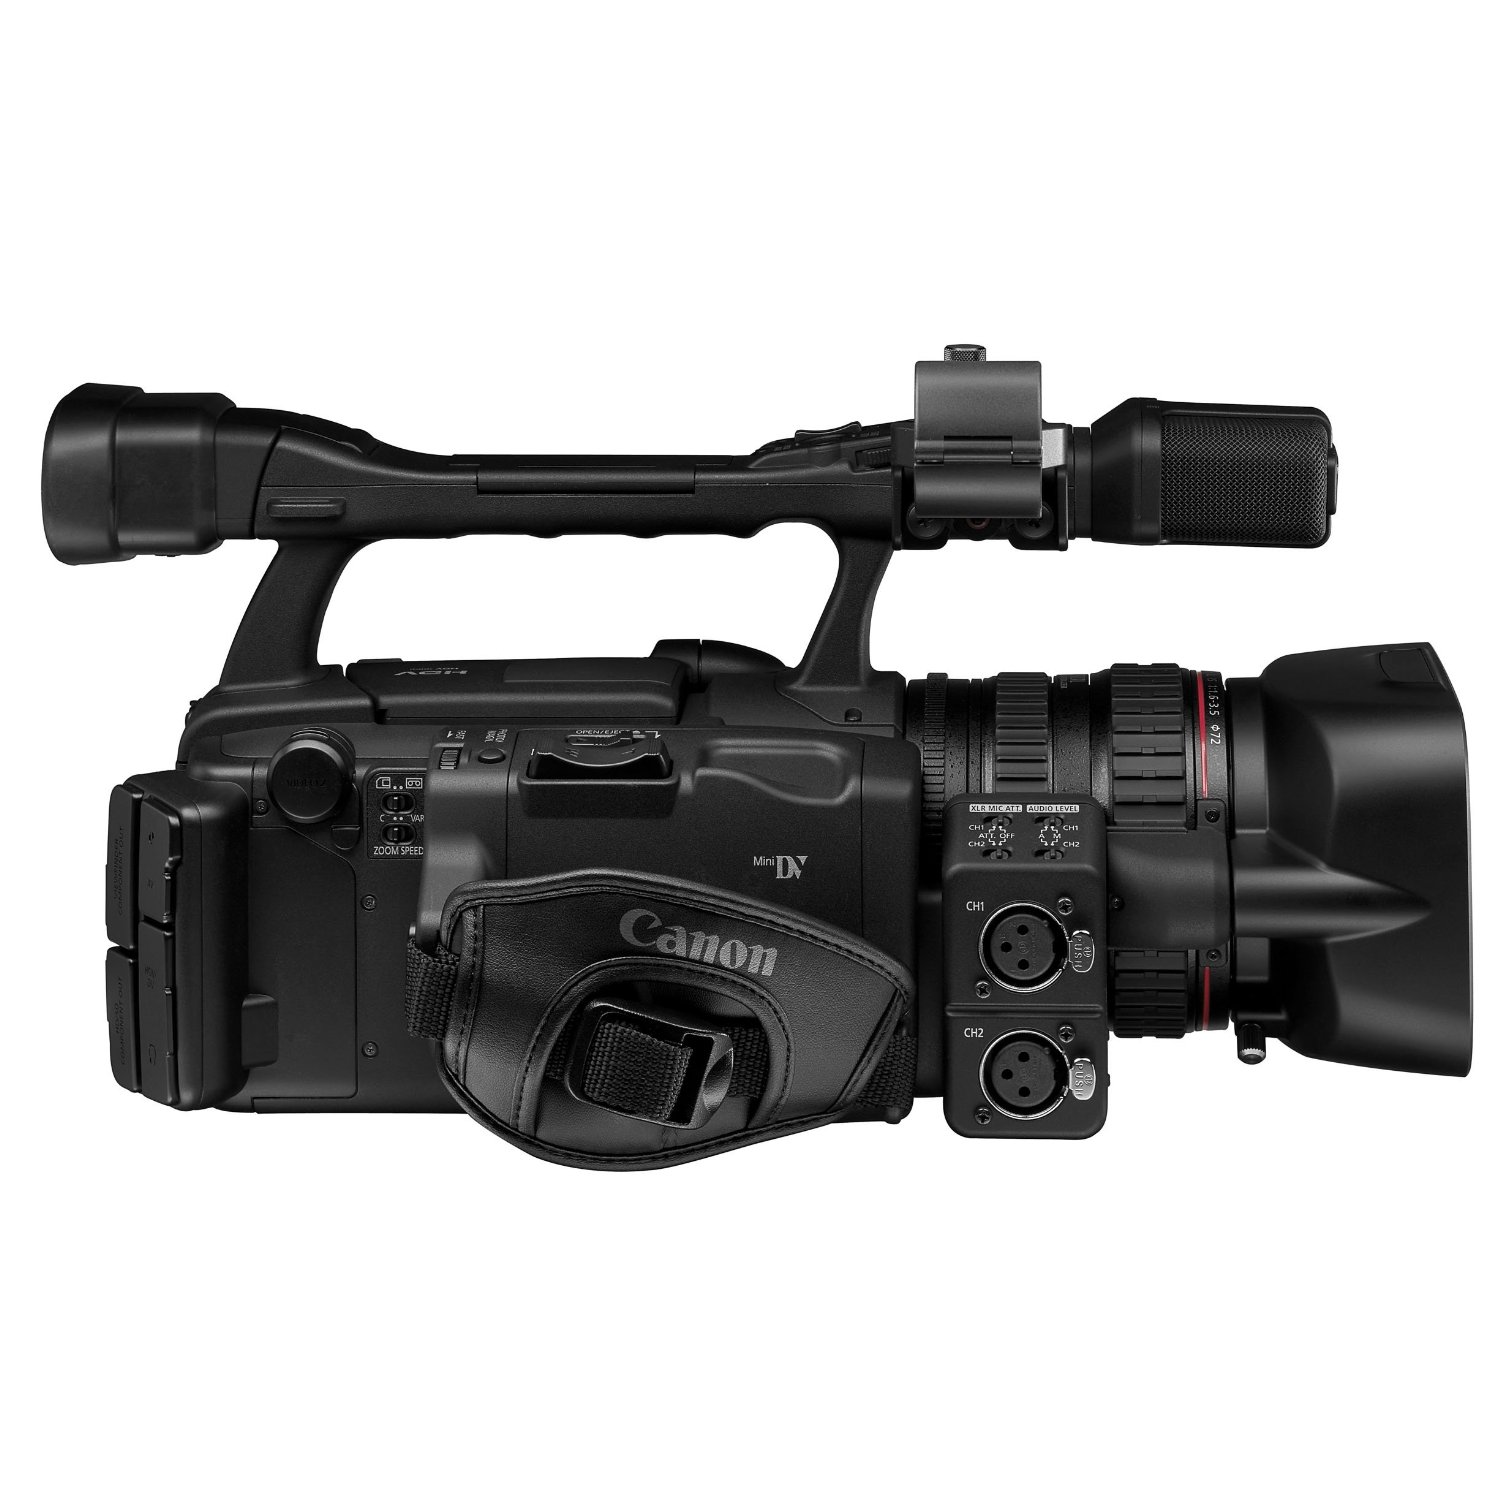 http://thetechjournal.com/wp-content/uploads/images/1111/1321357378-canon-xha1s-3ccd-hdv-high-definition-professional-camcorder--10.jpg